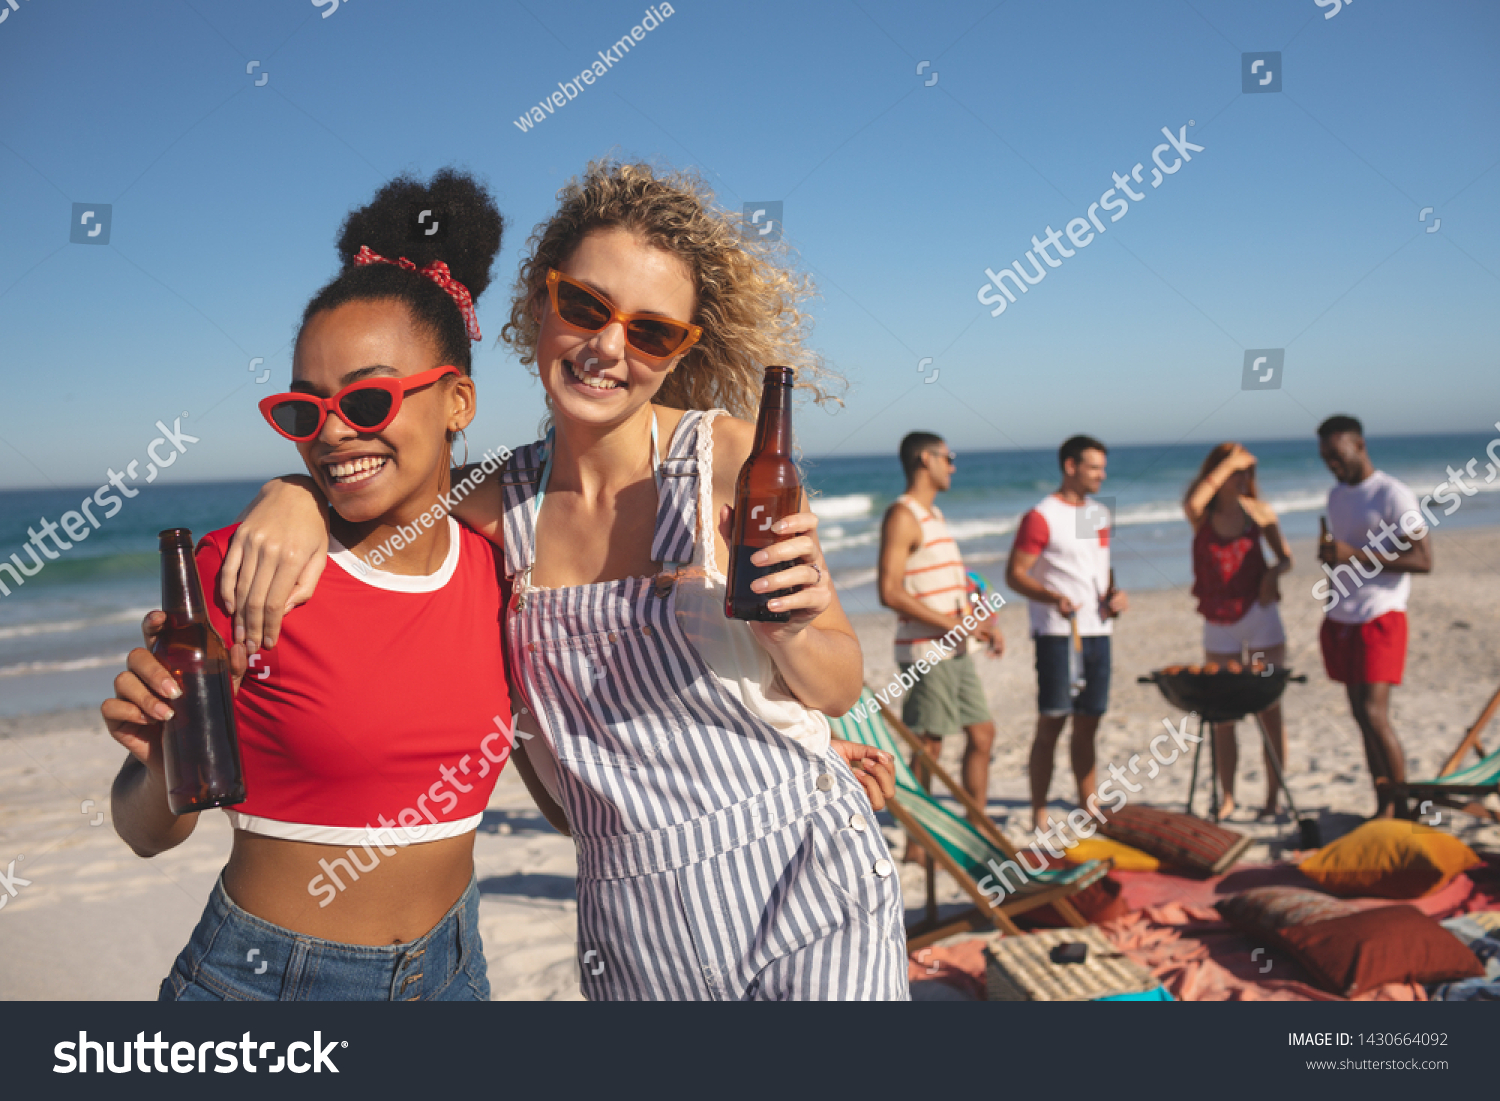 681 Black people holding bottle at the beach Images, Stock Photos ...